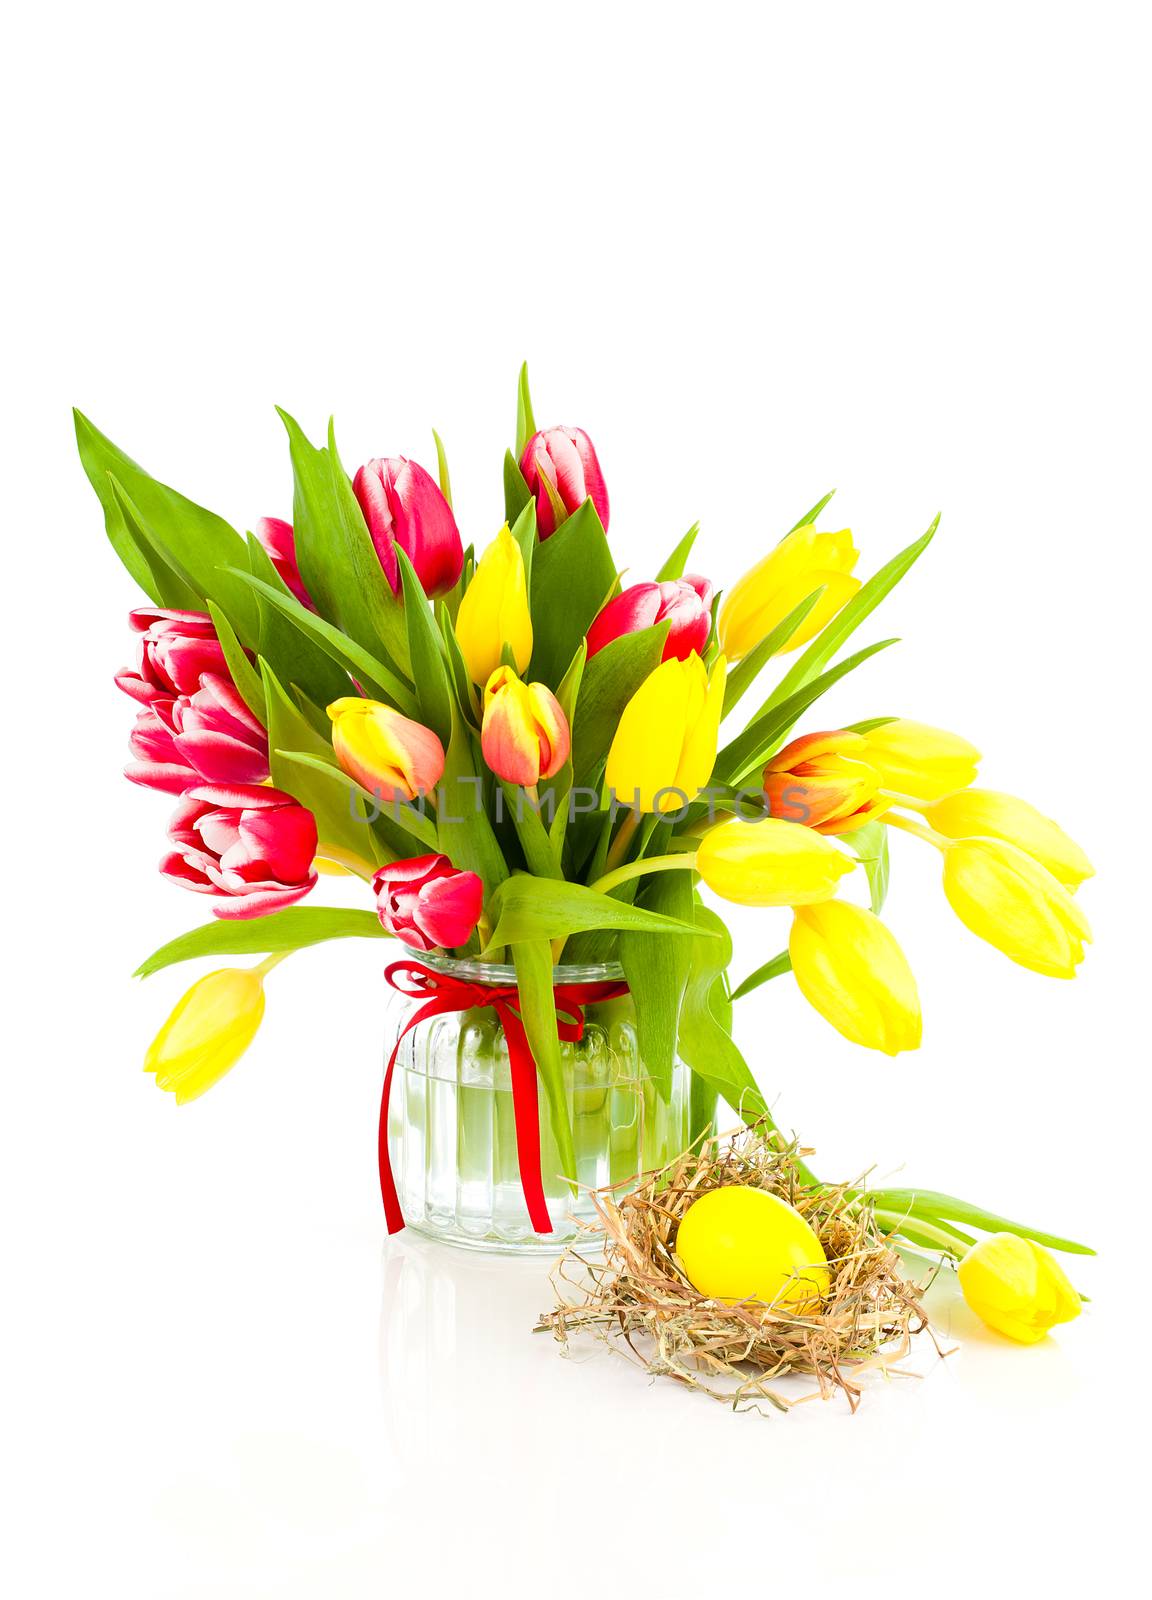 spring tulips with easter eggs on white background